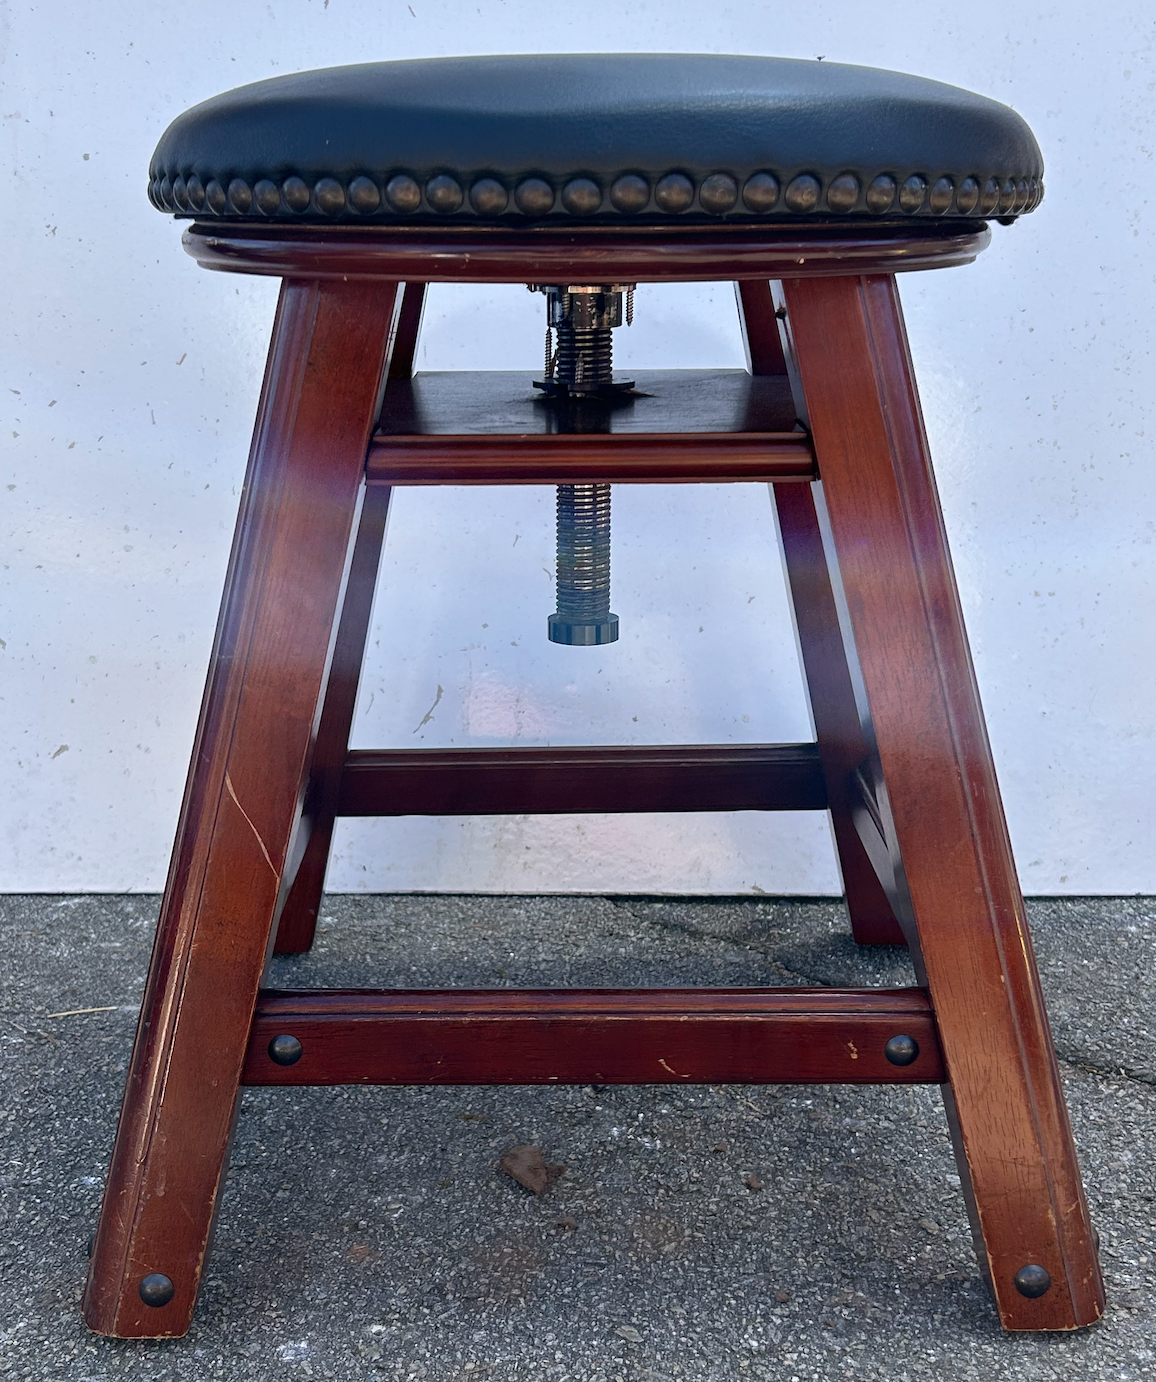 Vintage Wooden with Black Leather, Wooden Adjustable Piano Stool 16" with Steel Coil Spring